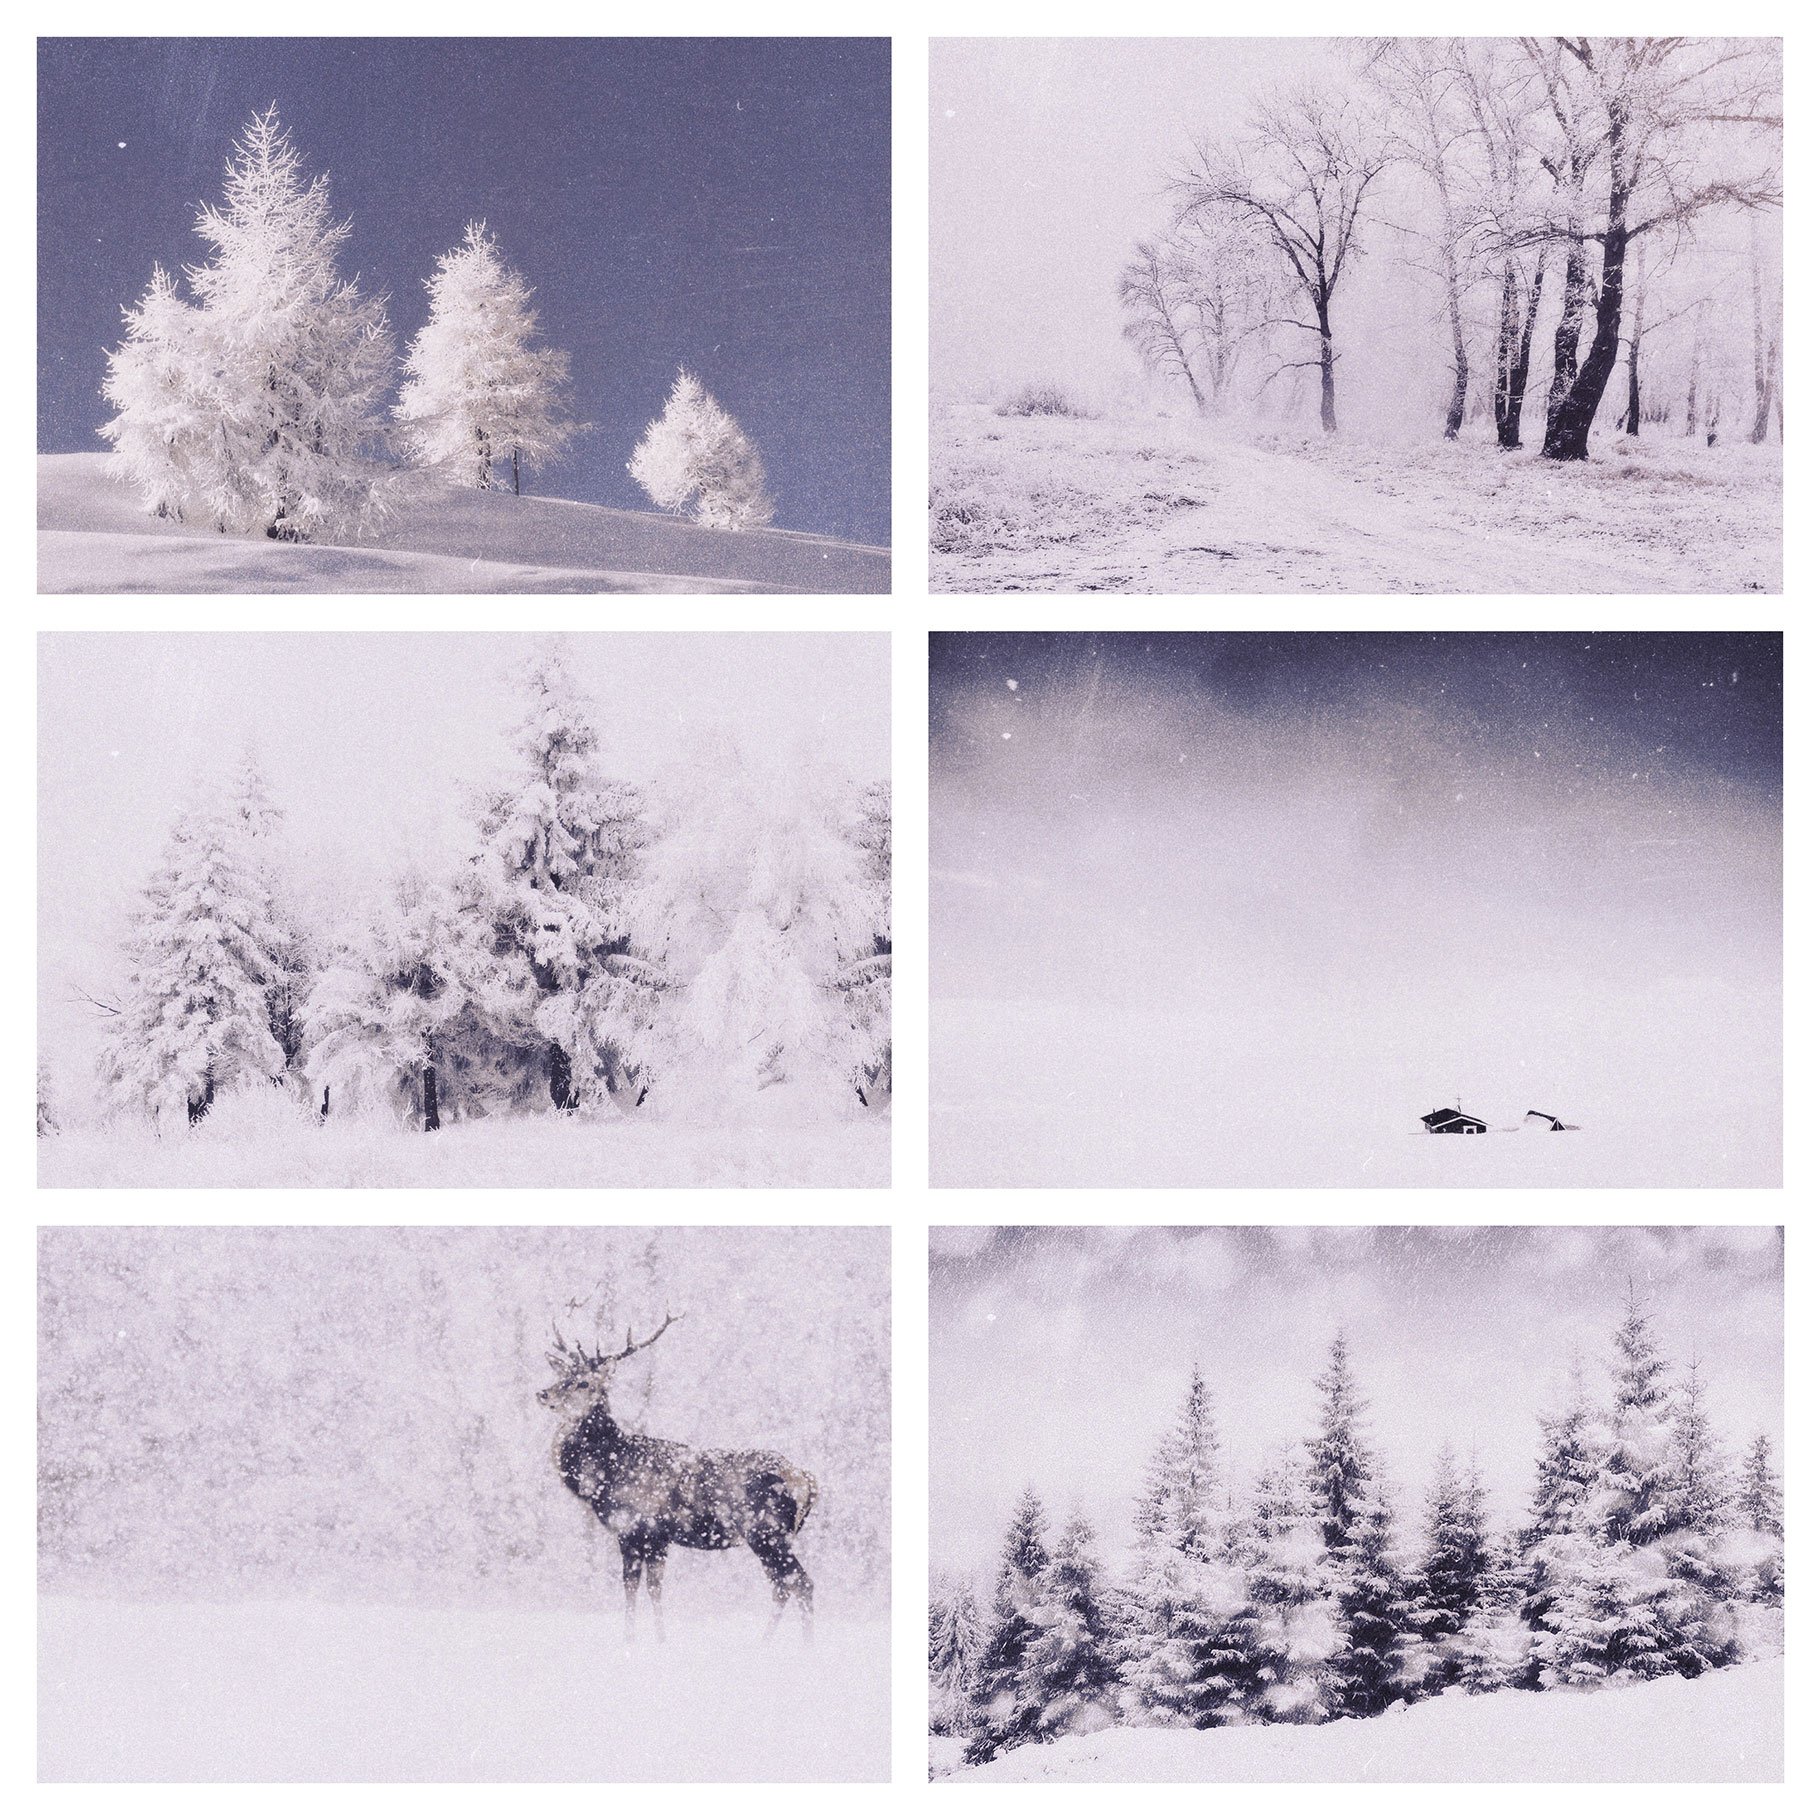 Series of four photographs of a snowy landscape.